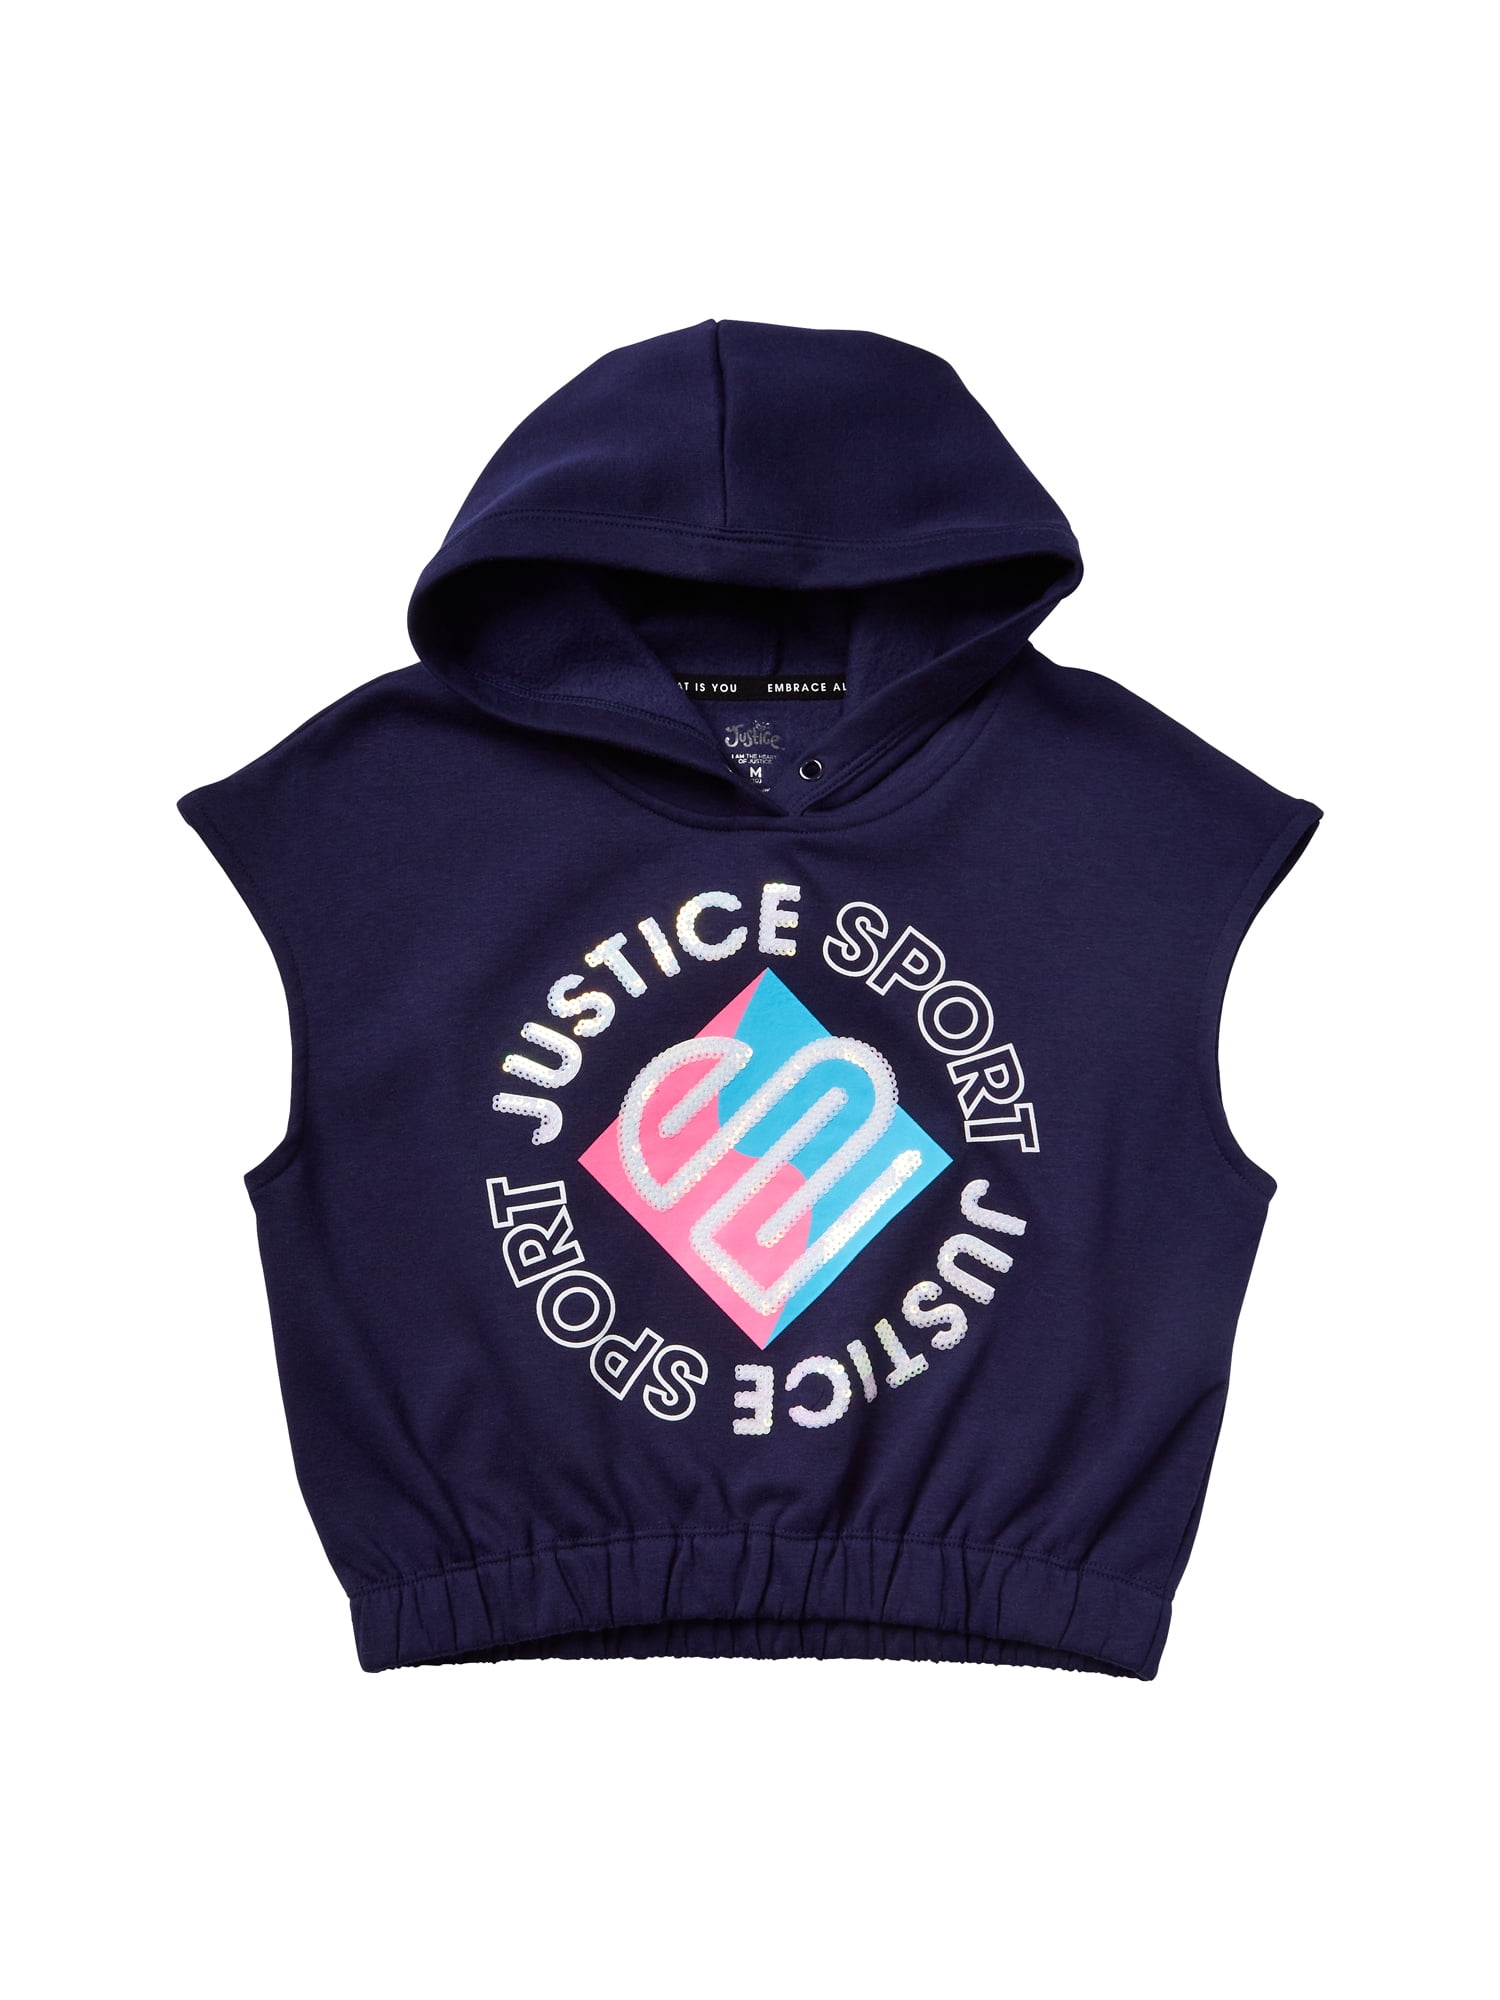 Justice Full Zip Hoodie Girls Size 12 Black Sparkle Spell Out Long Sleeve  Hooded